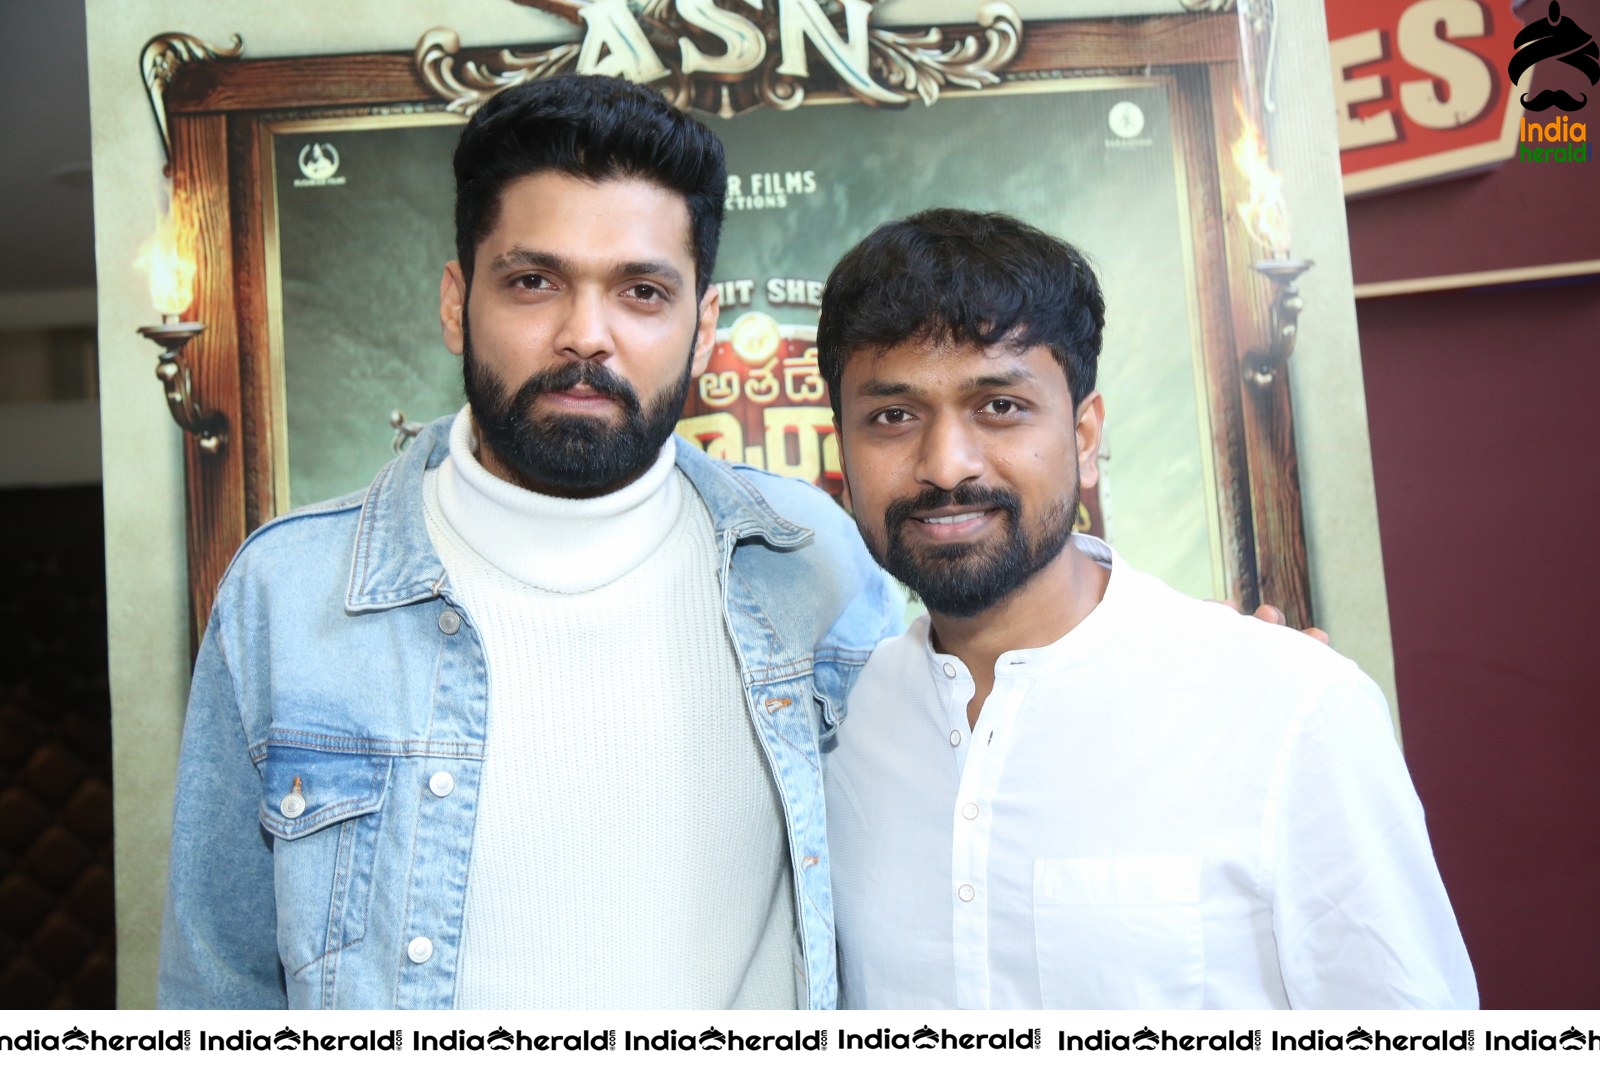 Director Sachin and Actor Rakshit Shetty spotted together